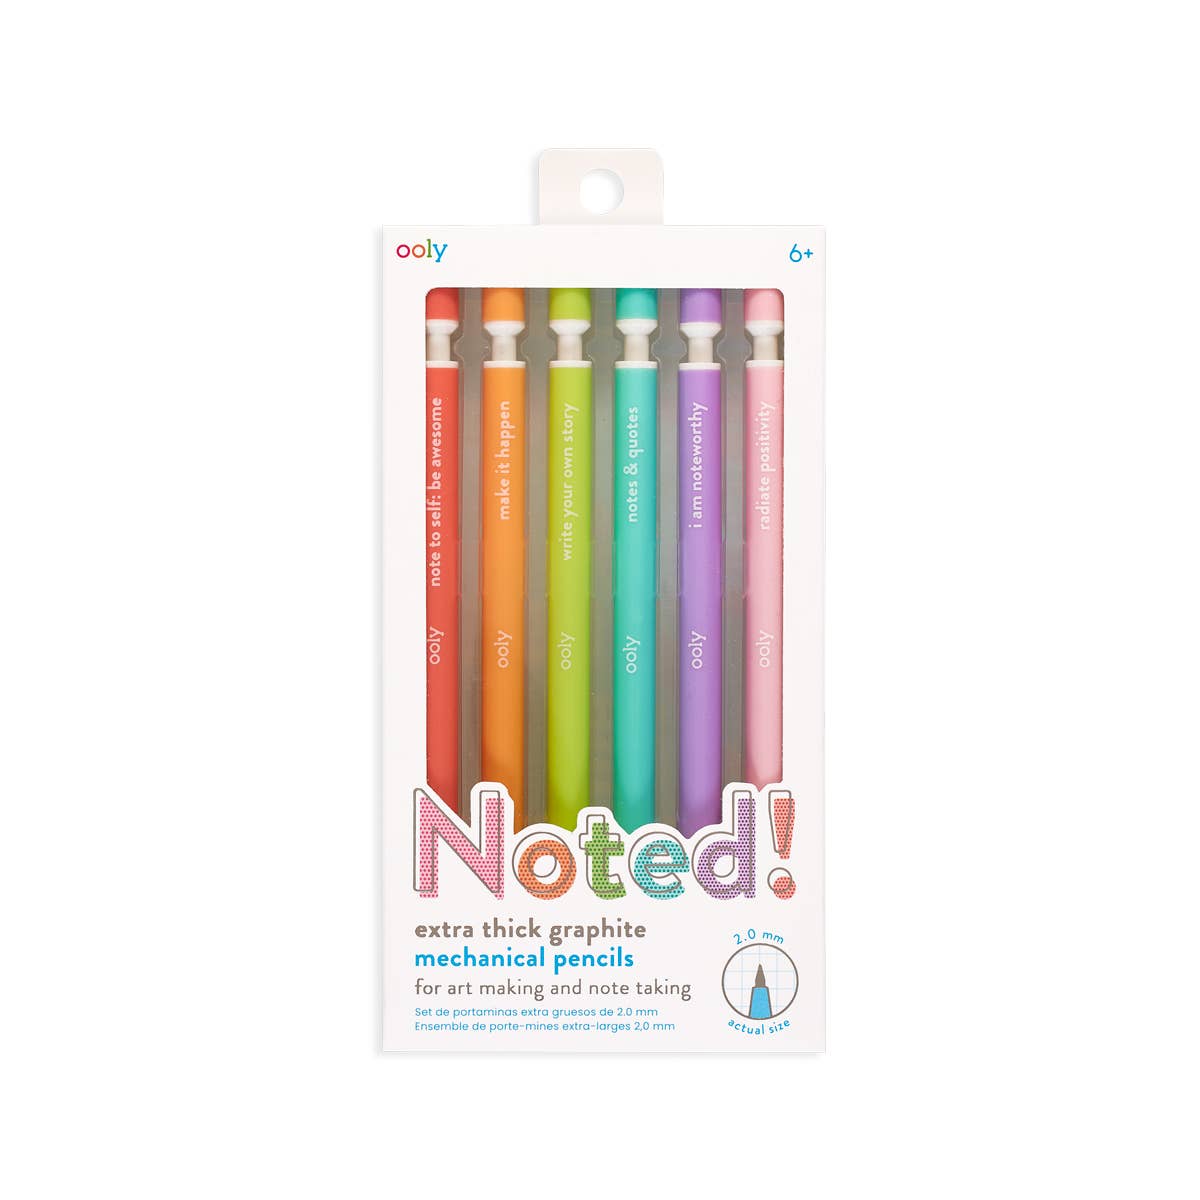 Noted! Graphite Mechanical Pencils